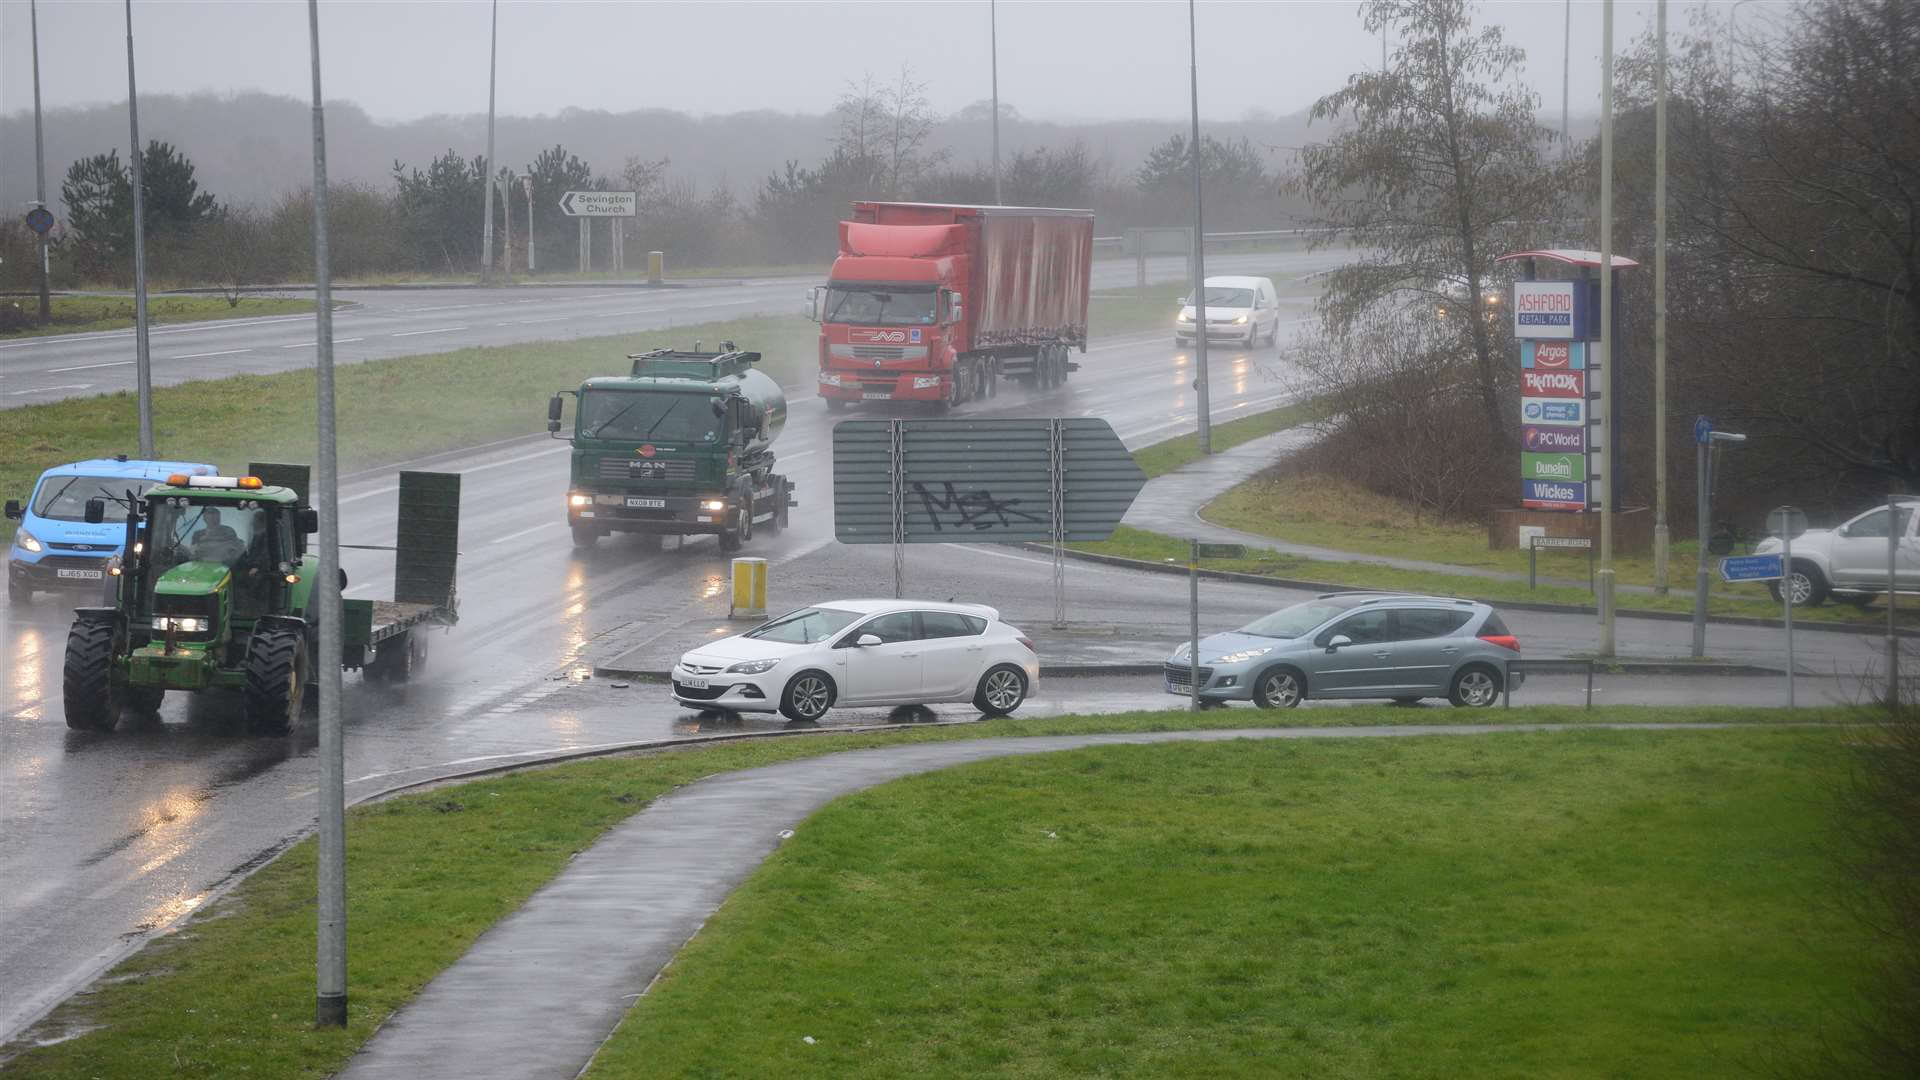 Vehicles turning out of Barrey Road onto the A2070 dual carriageway